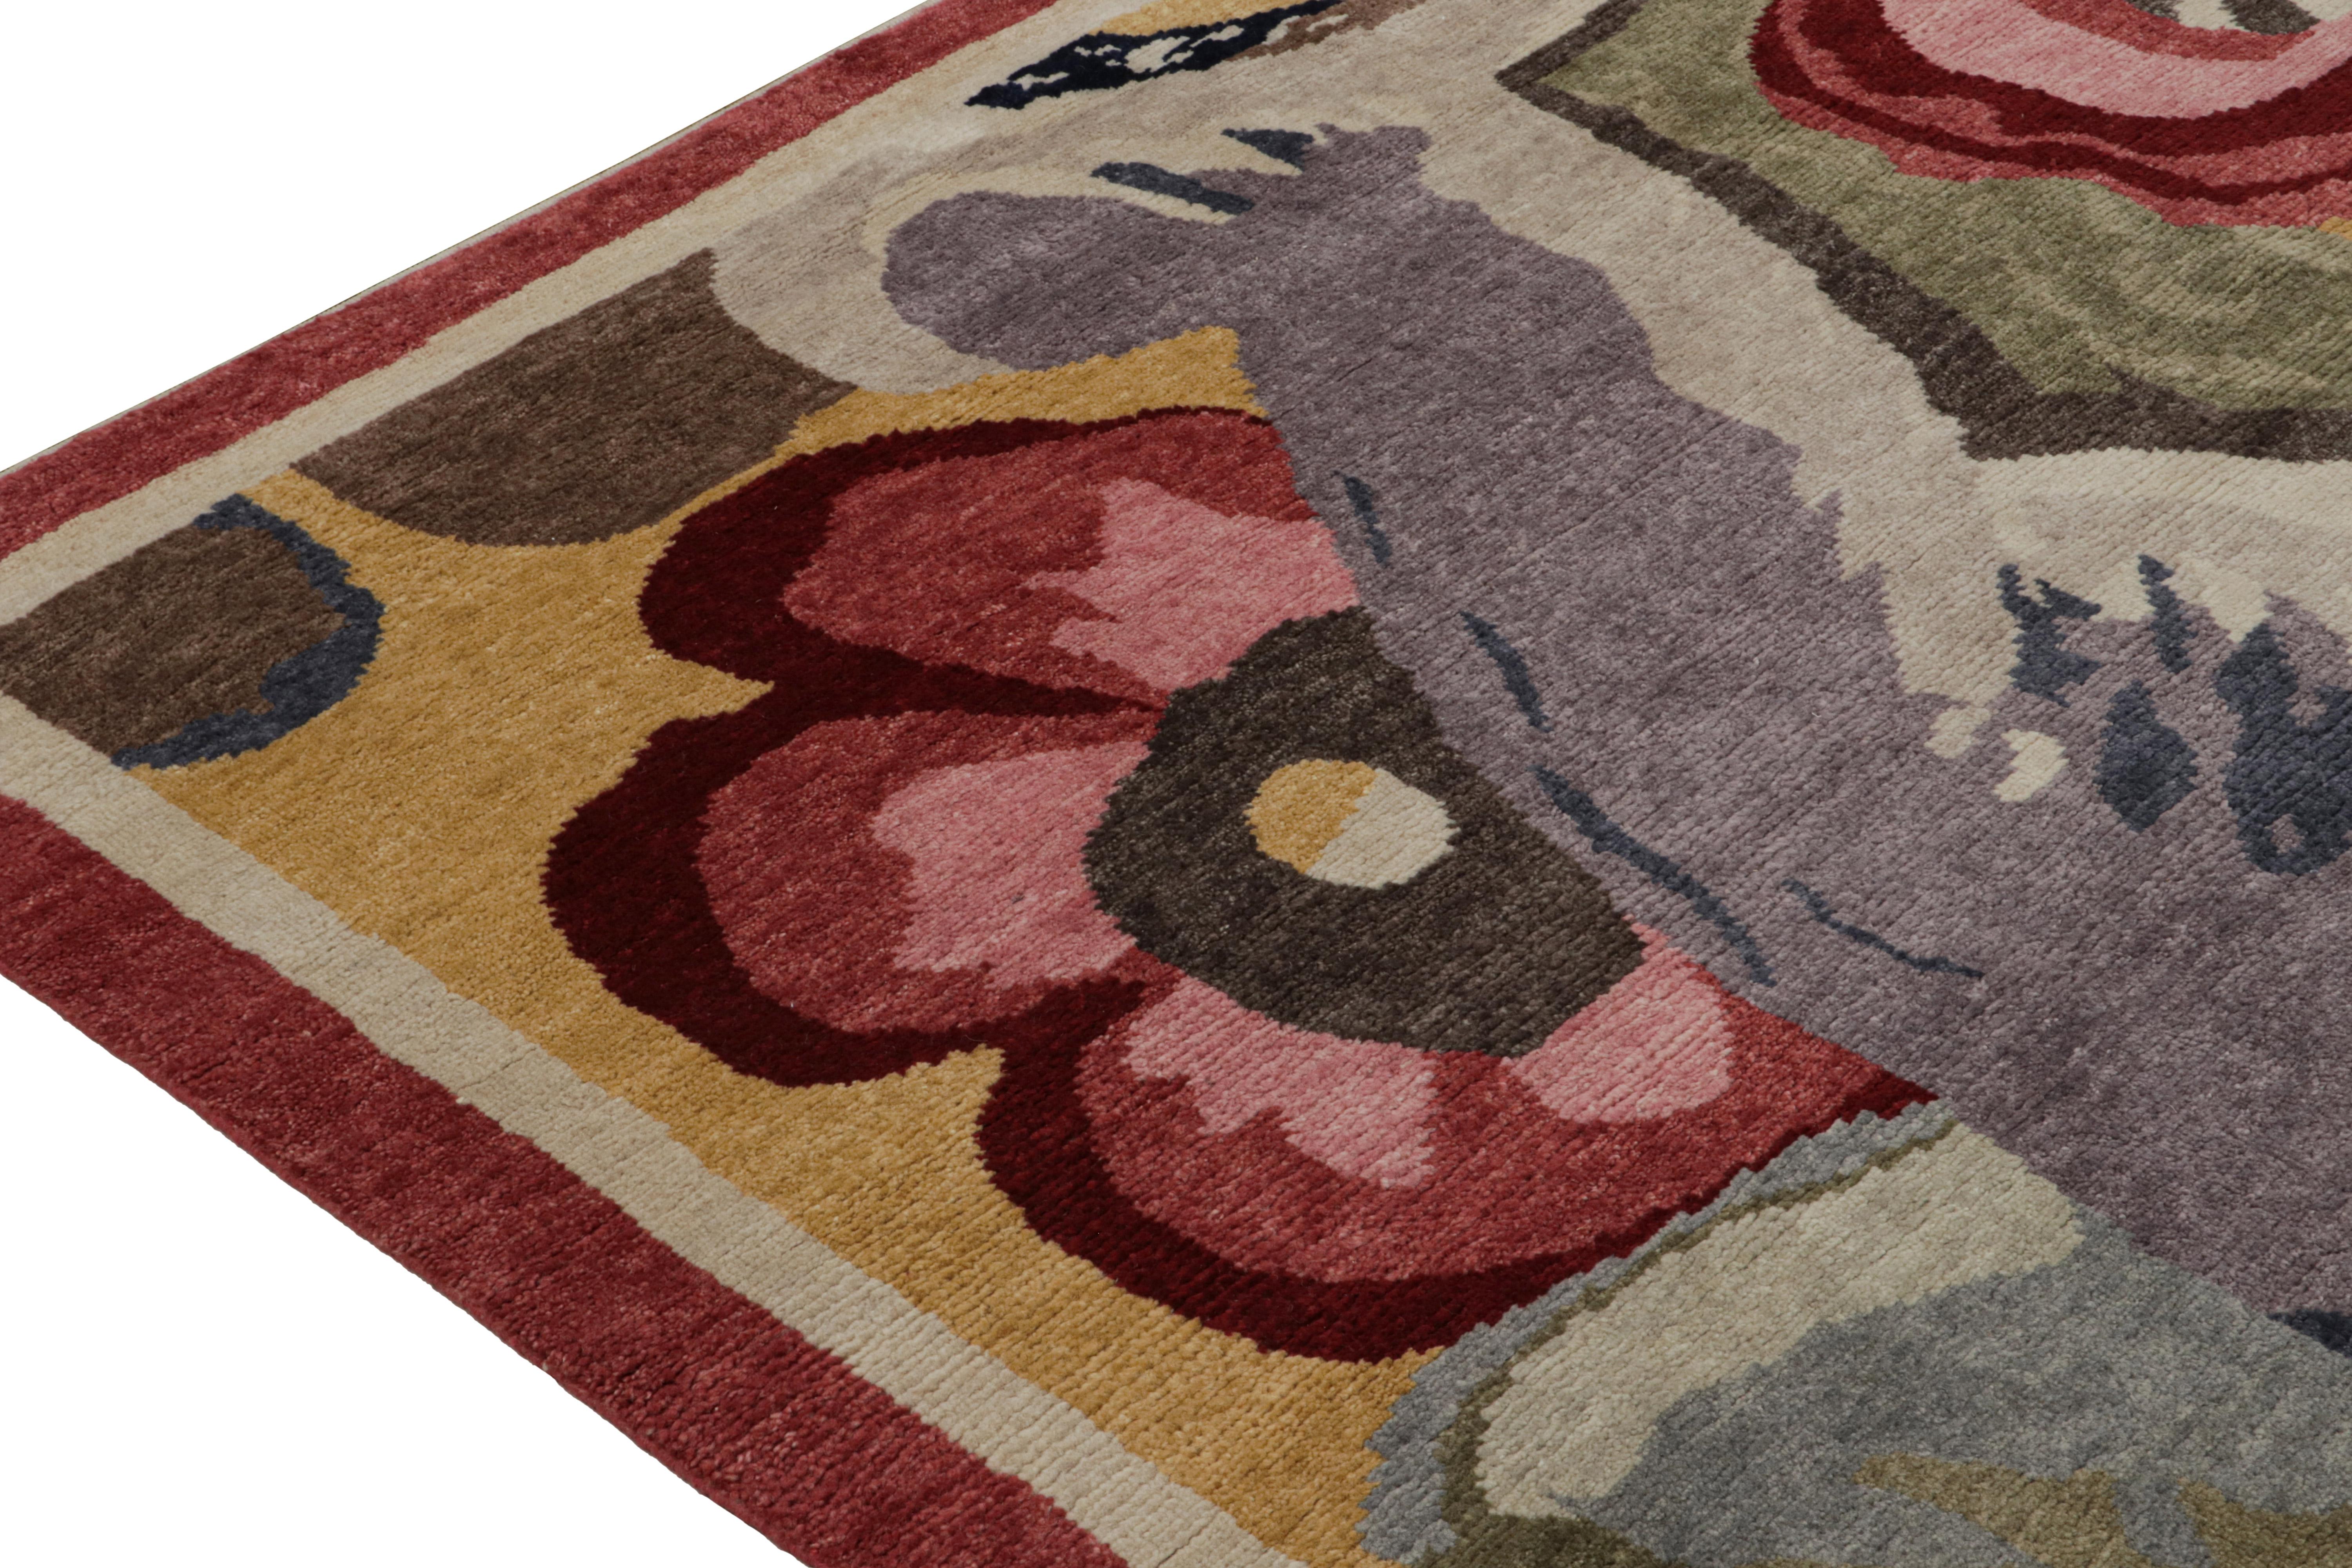 Indian Rug & Kilim’s French Style Art Deco rug in Polychromatic Floral Patterns For Sale